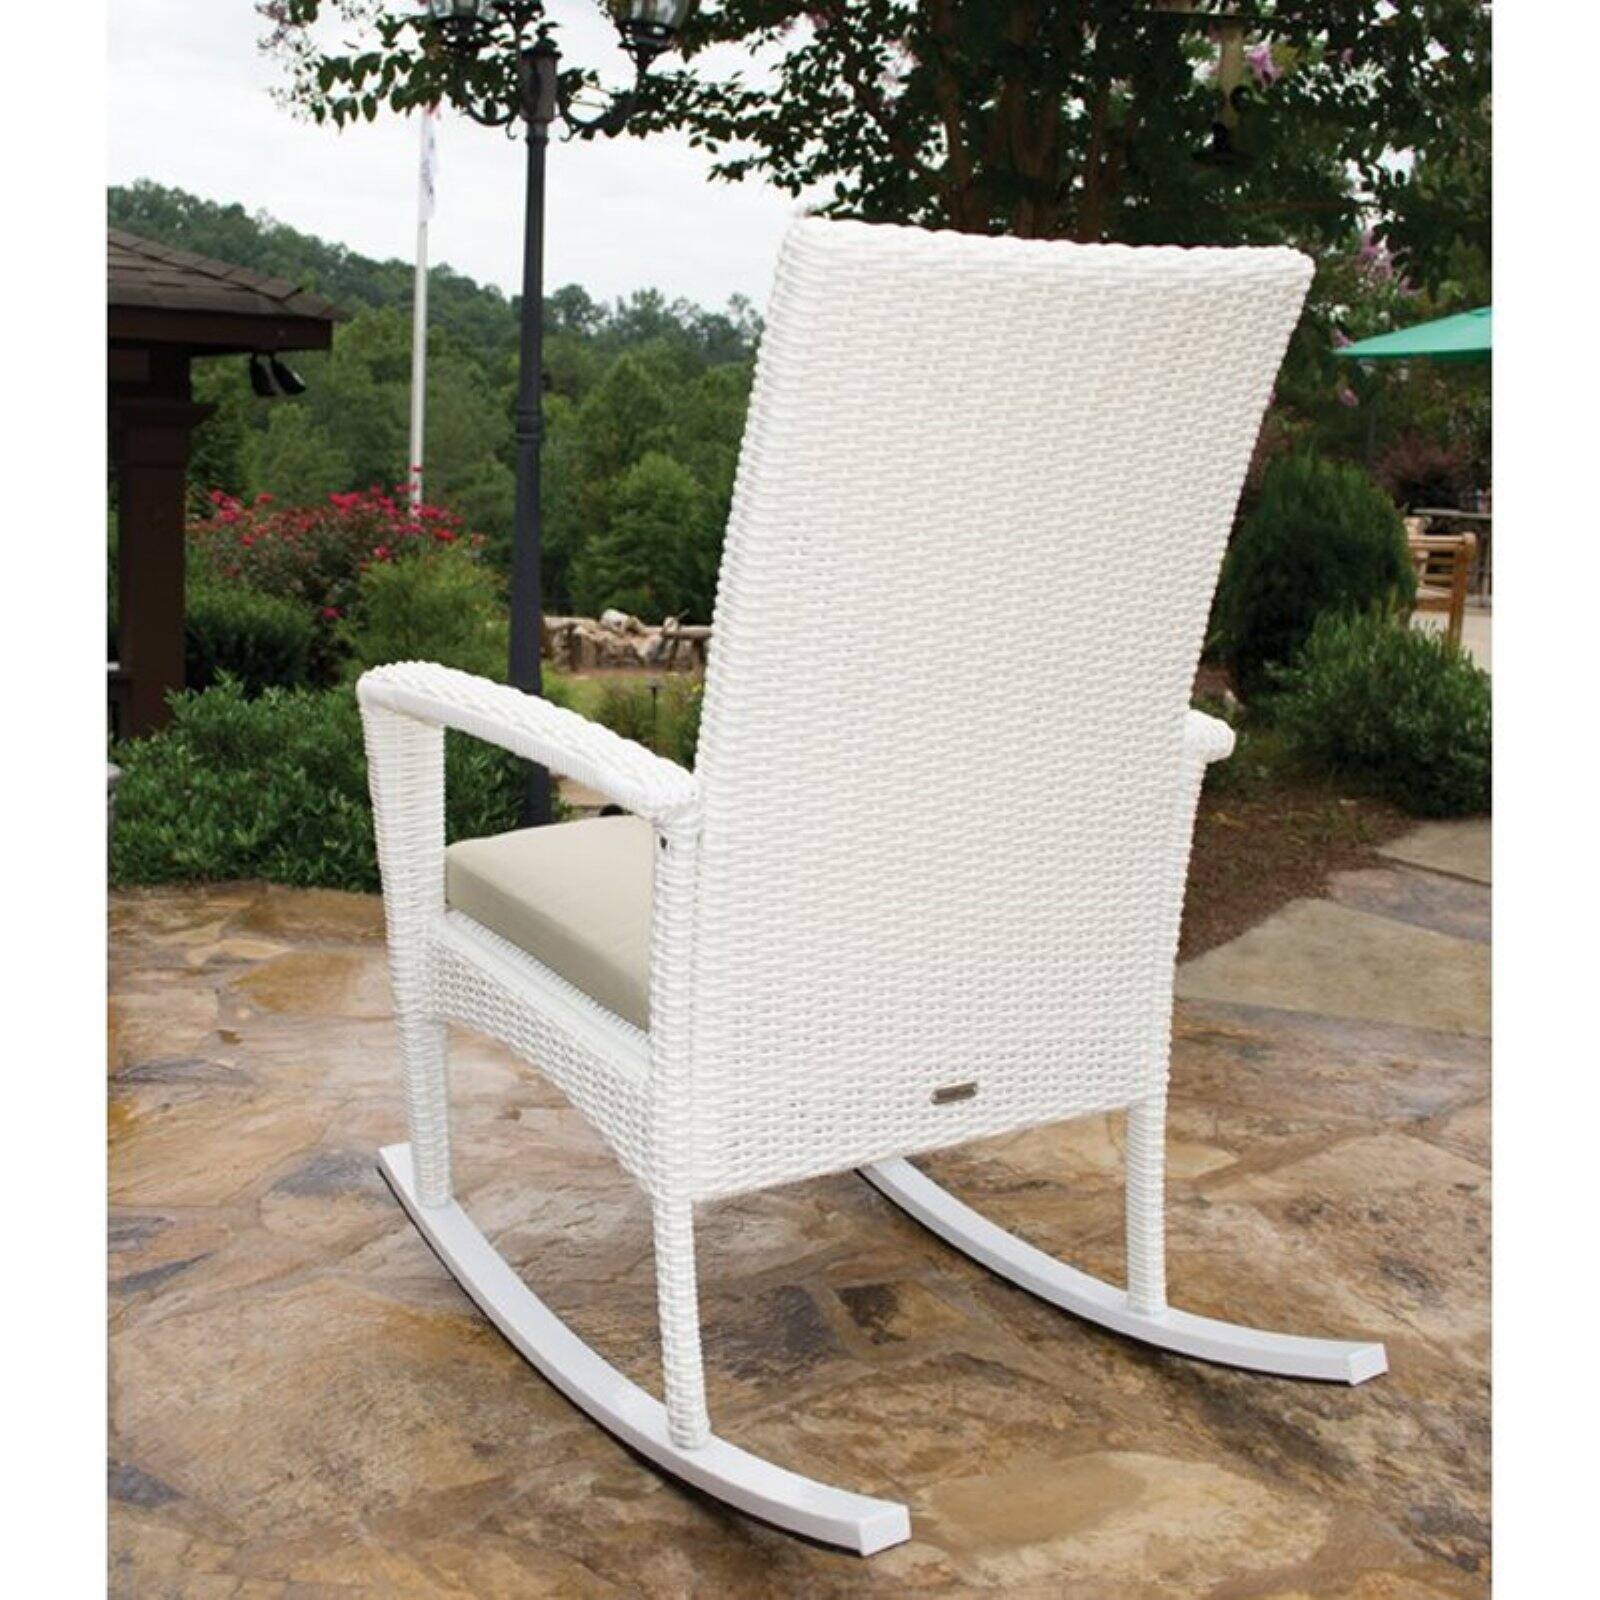 Tortuga Outdoor Bayview Wicker Rocking Chair with Cushion - image 5 of 11